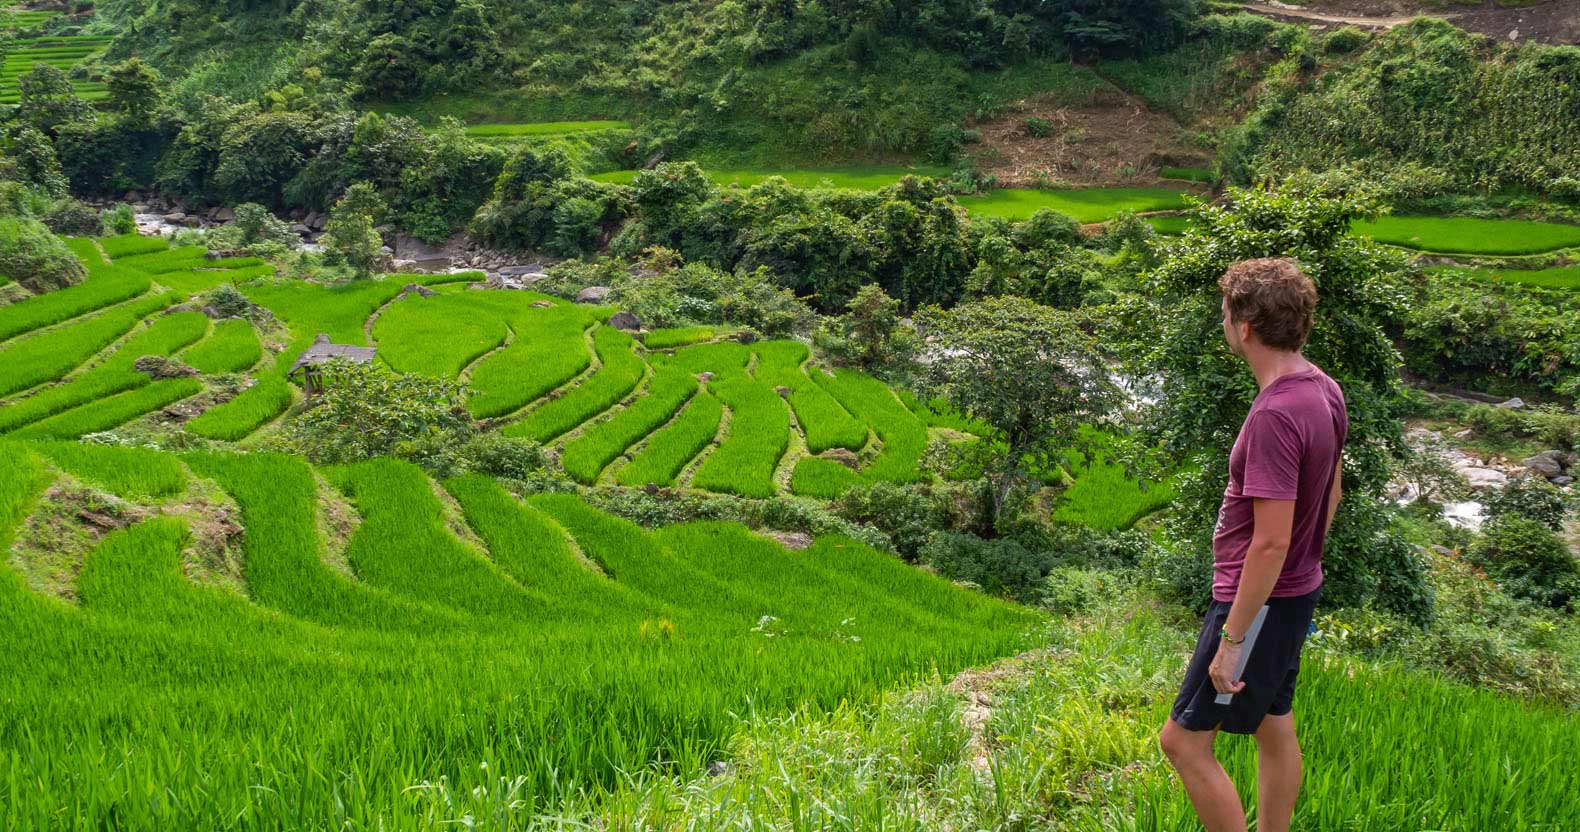 Our 2-day Off the Beaten Track Trekking in Sapa